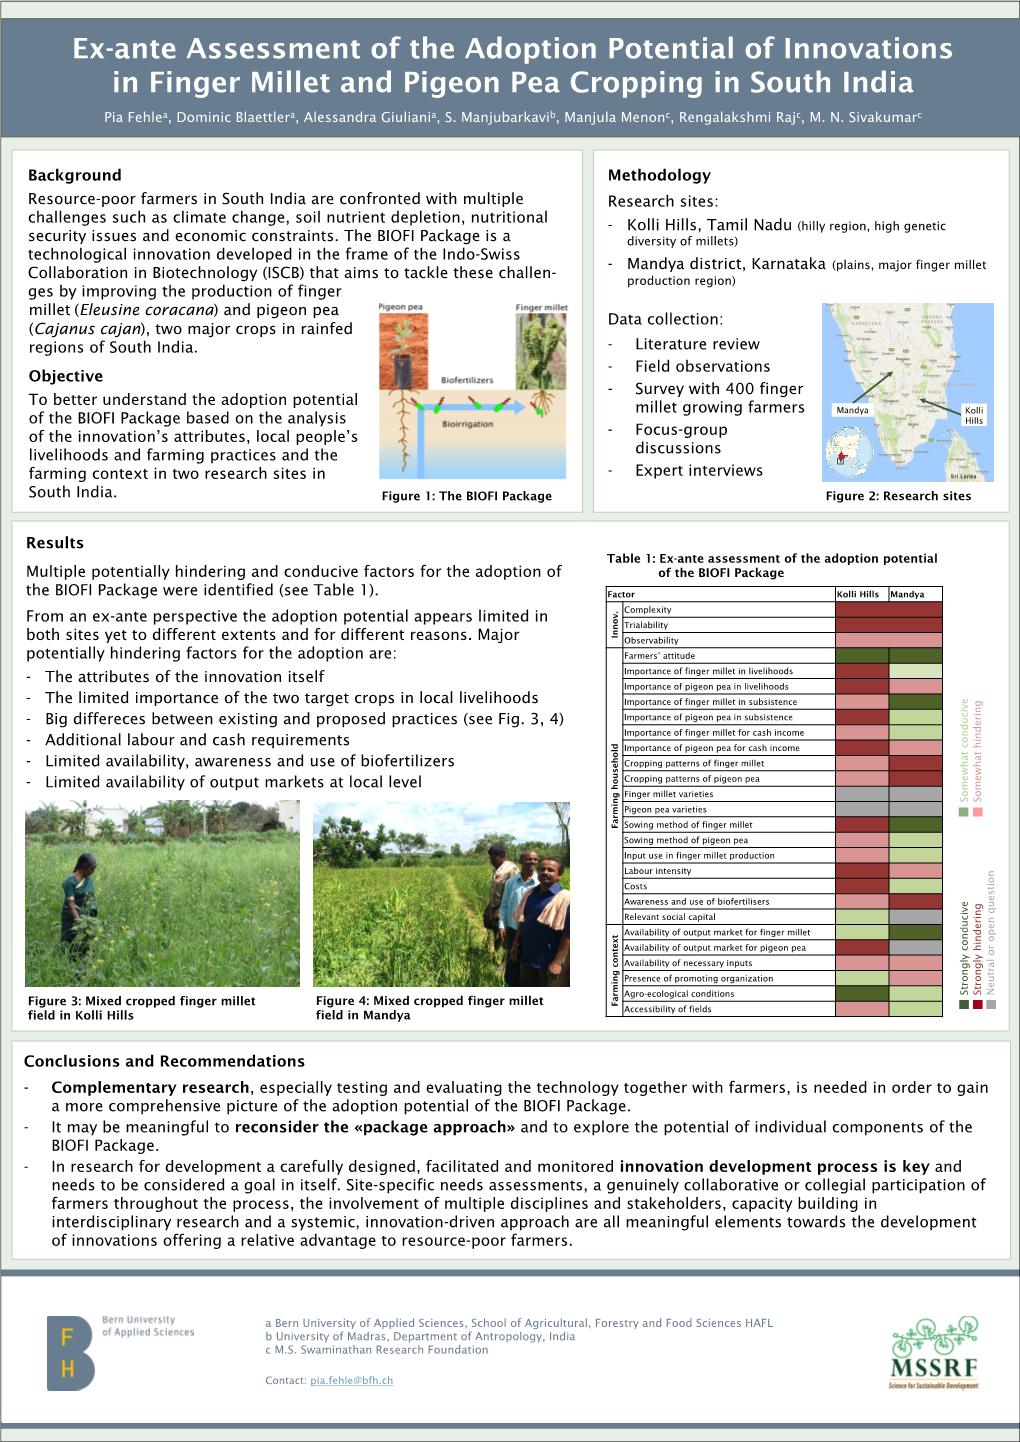 Ex-Ante Assessment of the Adoption Potential of Innovations in Rainfed